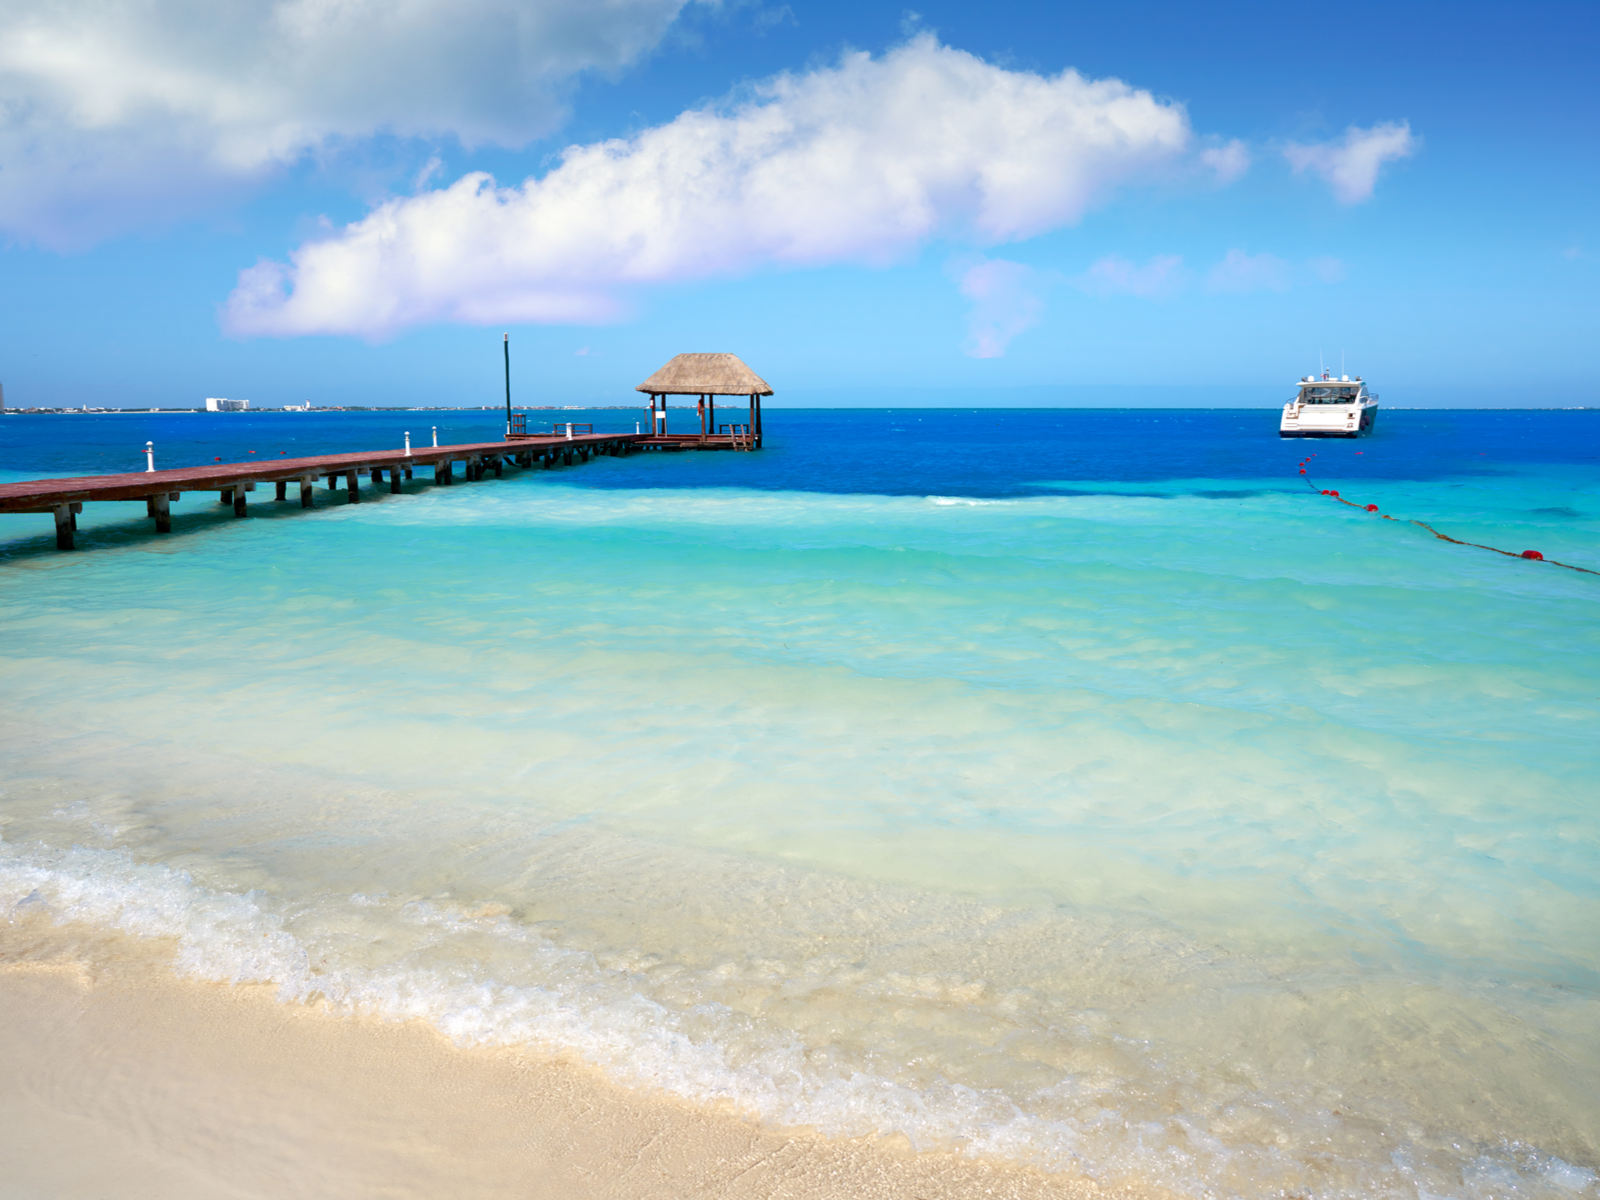 A hut at the end of a boardwalk and a ship anchored at a deep portion of Playa Langosta, pictured as a piece on the best beaches in Cancun